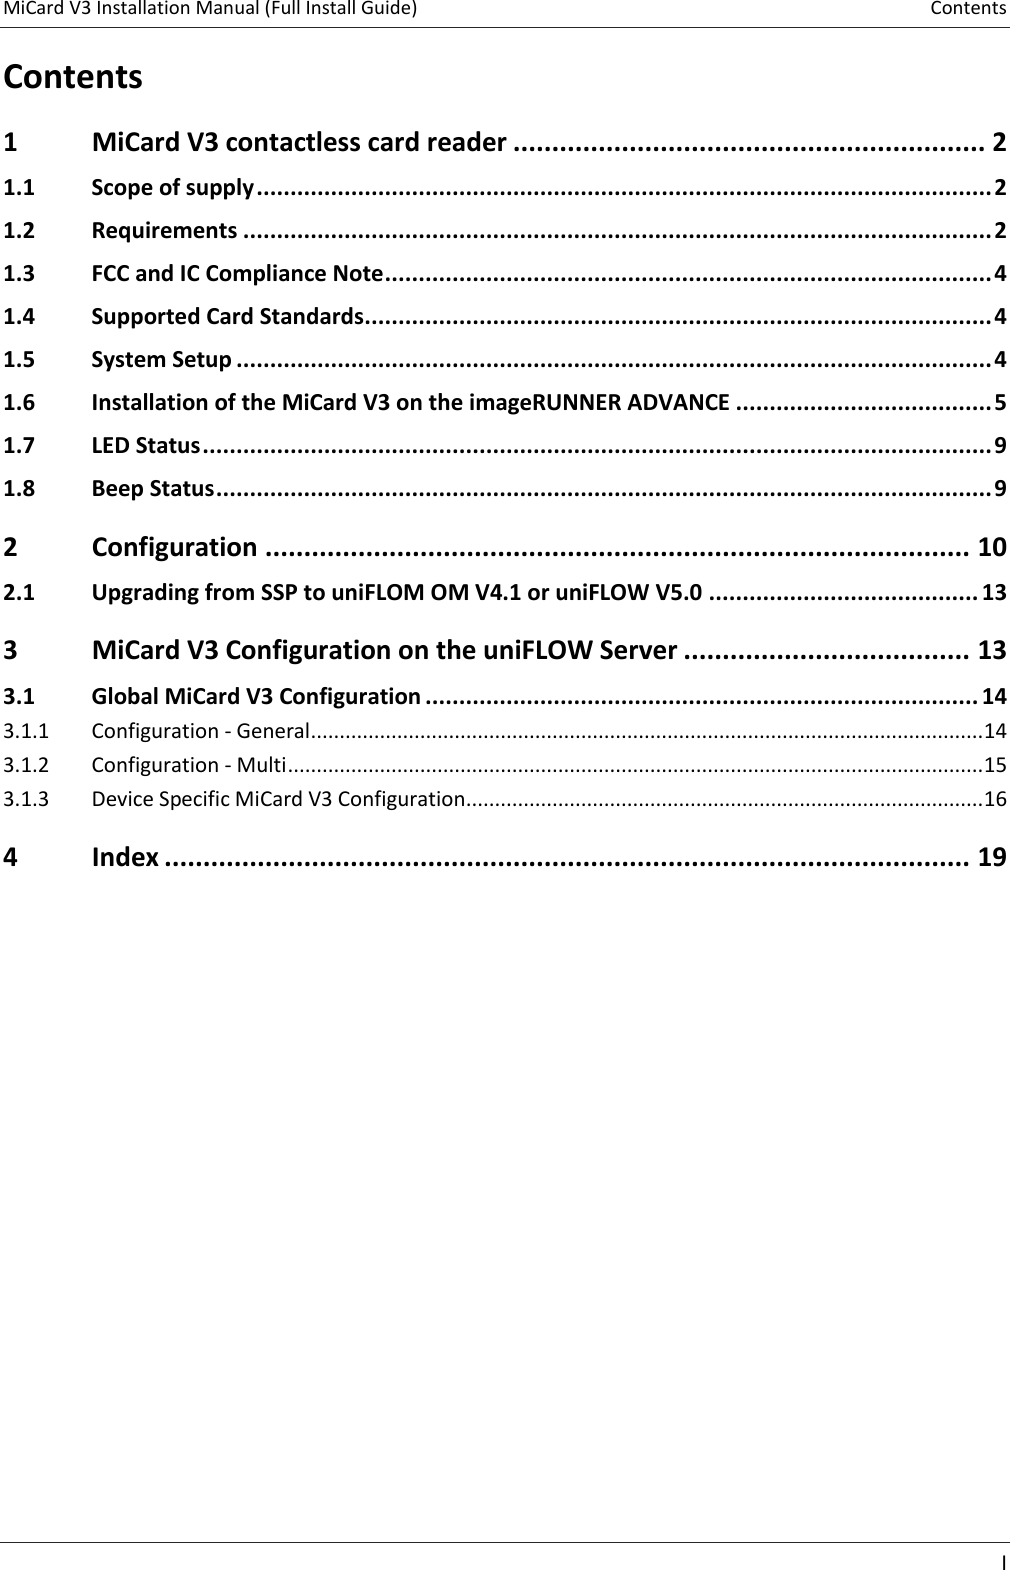 MiCard V3 Installation Manual (Full Install Guide)  Contents    I  Contents 1 MiCard V3 contactless card reader ............................................................. 2 1.1 Scope of supply ............................................................................................................. 2 1.2 Requirements ............................................................................................................... 2 1.3 FCC and IC Compliance Note .......................................................................................... 4 1.4 Supported Card Standards............................................................................................. 4 1.5 System Setup ................................................................................................................ 4 1.6 Installation of the MiCard V3 on the imageRUNNER ADVANCE ...................................... 5 1.7 LED Status ..................................................................................................................... 9 1.8 Beep Status ................................................................................................................... 9 2 Configuration ........................................................................................... 10 2.1 Upgrading from SSP to uniFLOM OM V4.1 or uniFLOW V5.0 ........................................ 13 3 MiCard V3 Configuration on the uniFLOW Server ..................................... 13 3.1 Global MiCard V3 Configuration .................................................................................. 14 3.1.1  Configuration - General ..................................................................................................................... 14 3.1.2  Configuration - Multi ......................................................................................................................... 15 3.1.3  Device Specific MiCard V3 Configuration .......................................................................................... 16 4 Index ........................................................................................................ 19    